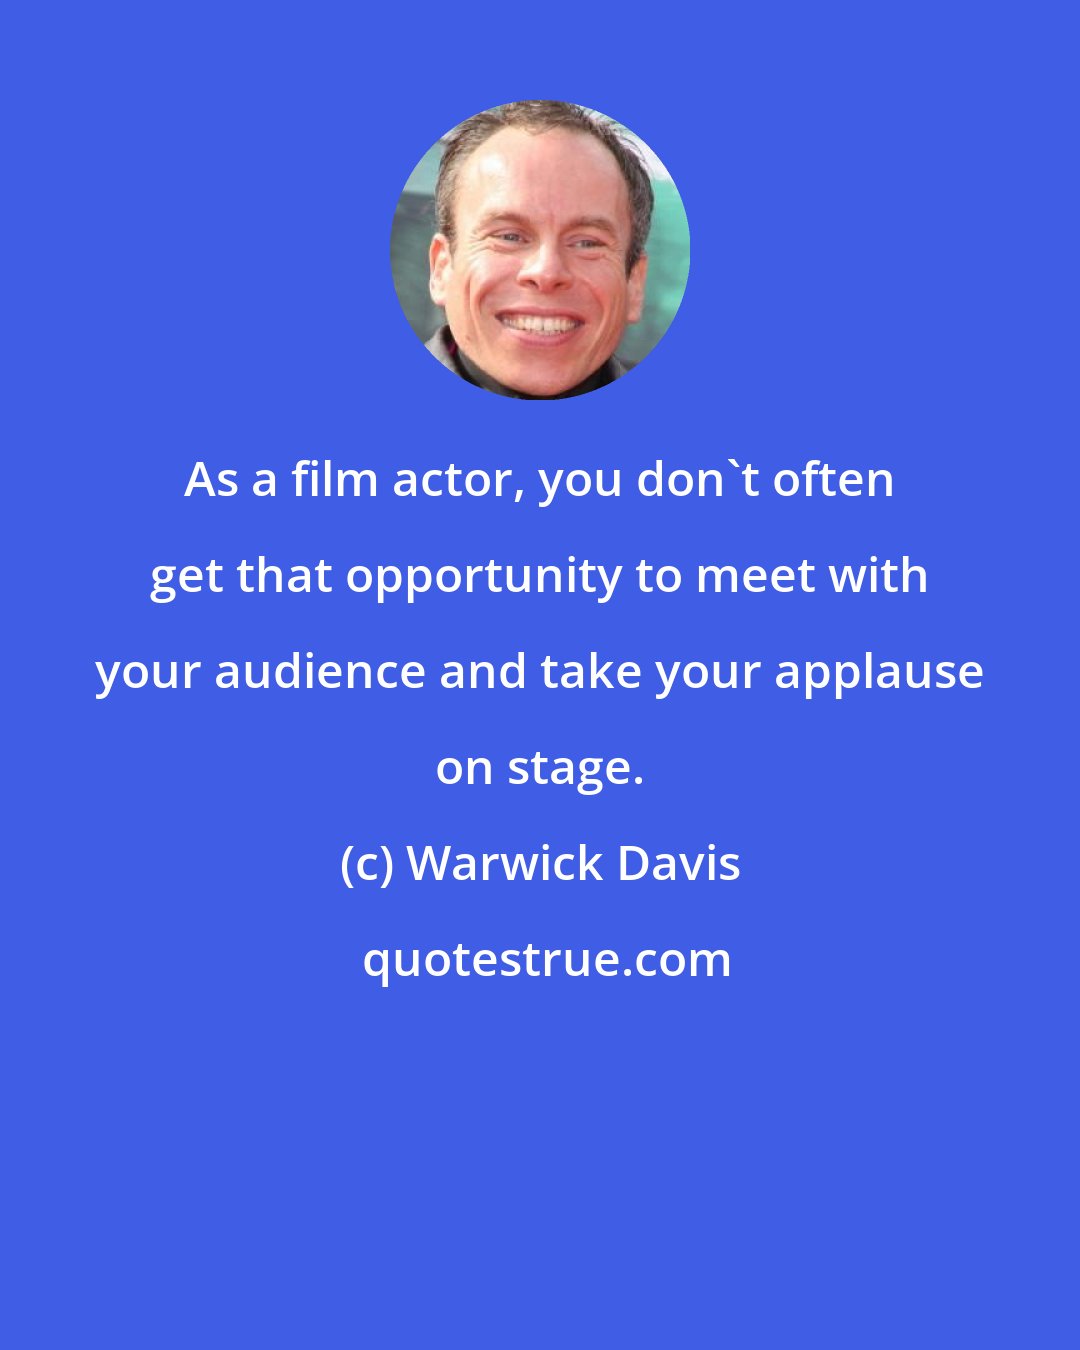 Warwick Davis: As a film actor, you don't often get that opportunity to meet with your audience and take your applause on stage.